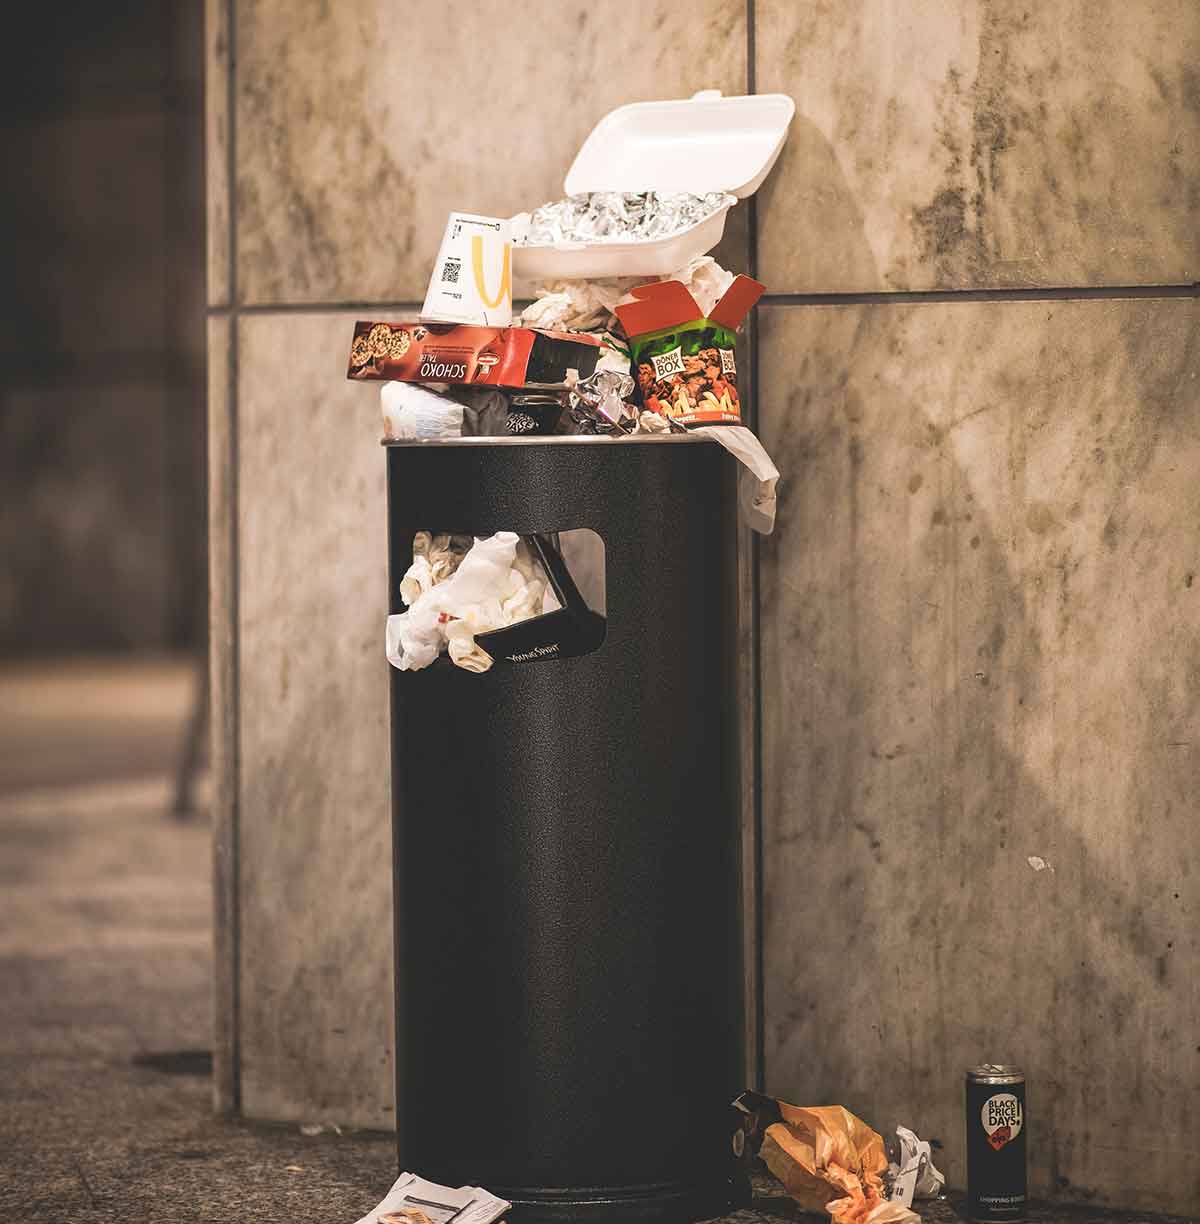 Trash can on a concrete wall that is overflowing with garbage.